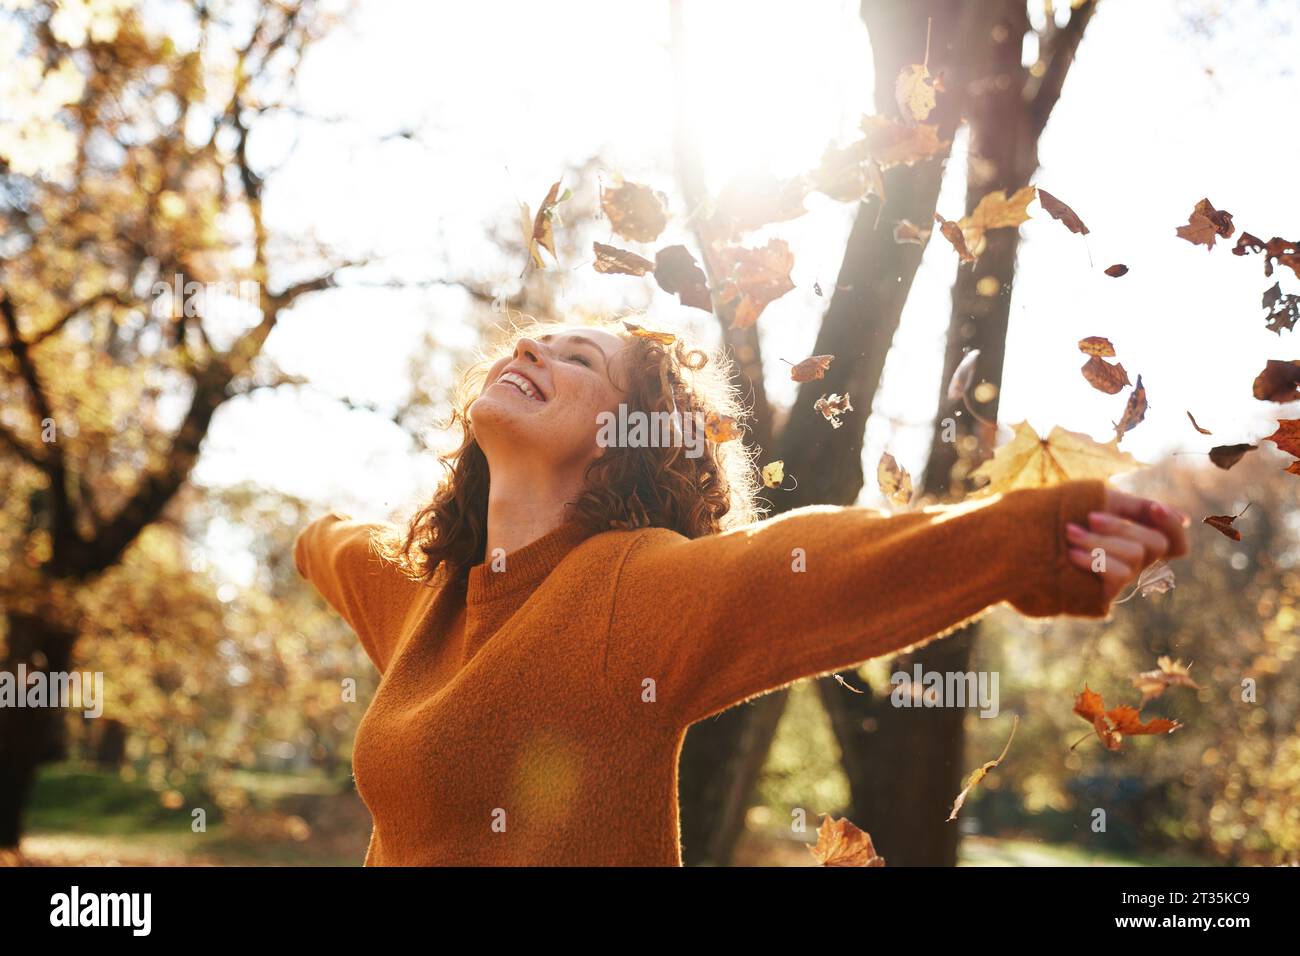 Redhead woman with arms outstretched enjoying autumn leaves falling at park Stock Photo